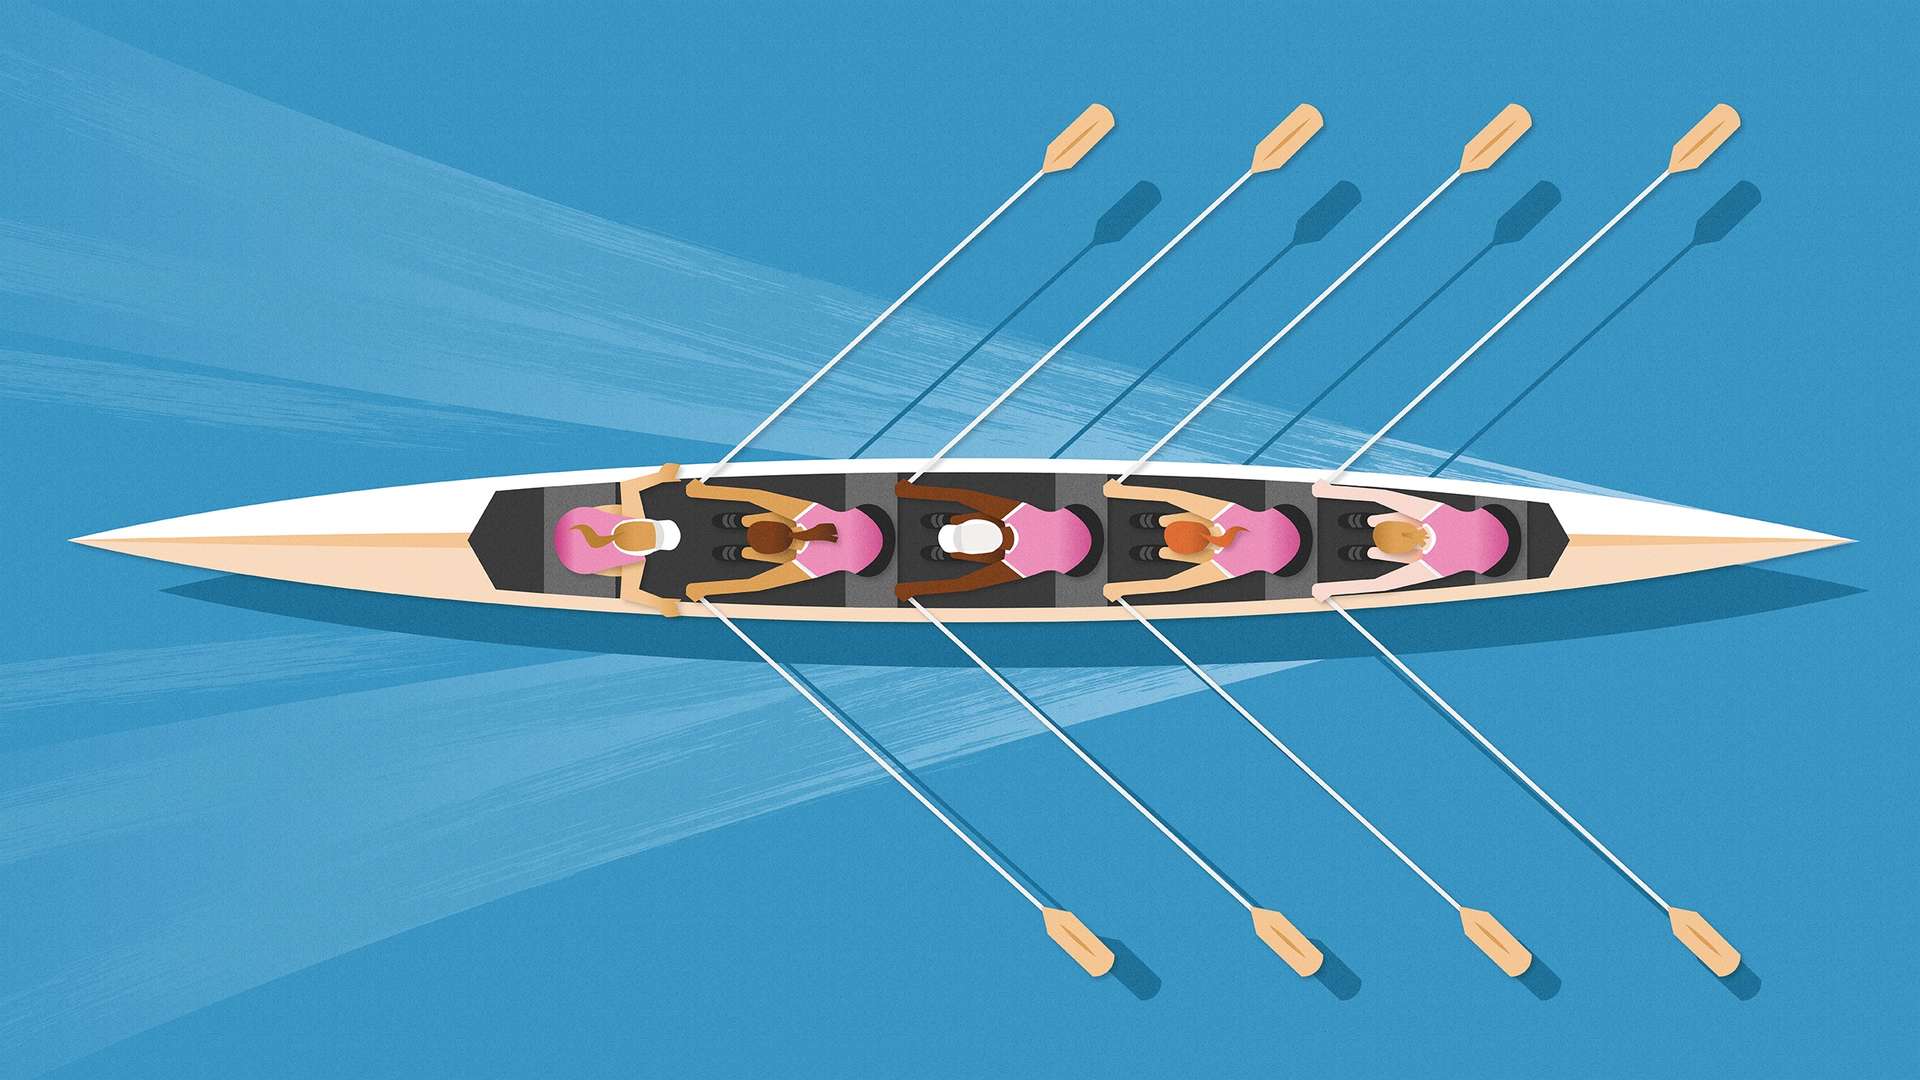 A bird's eye view of a coxswain steering a rowing team as they zip through the water in their boat.